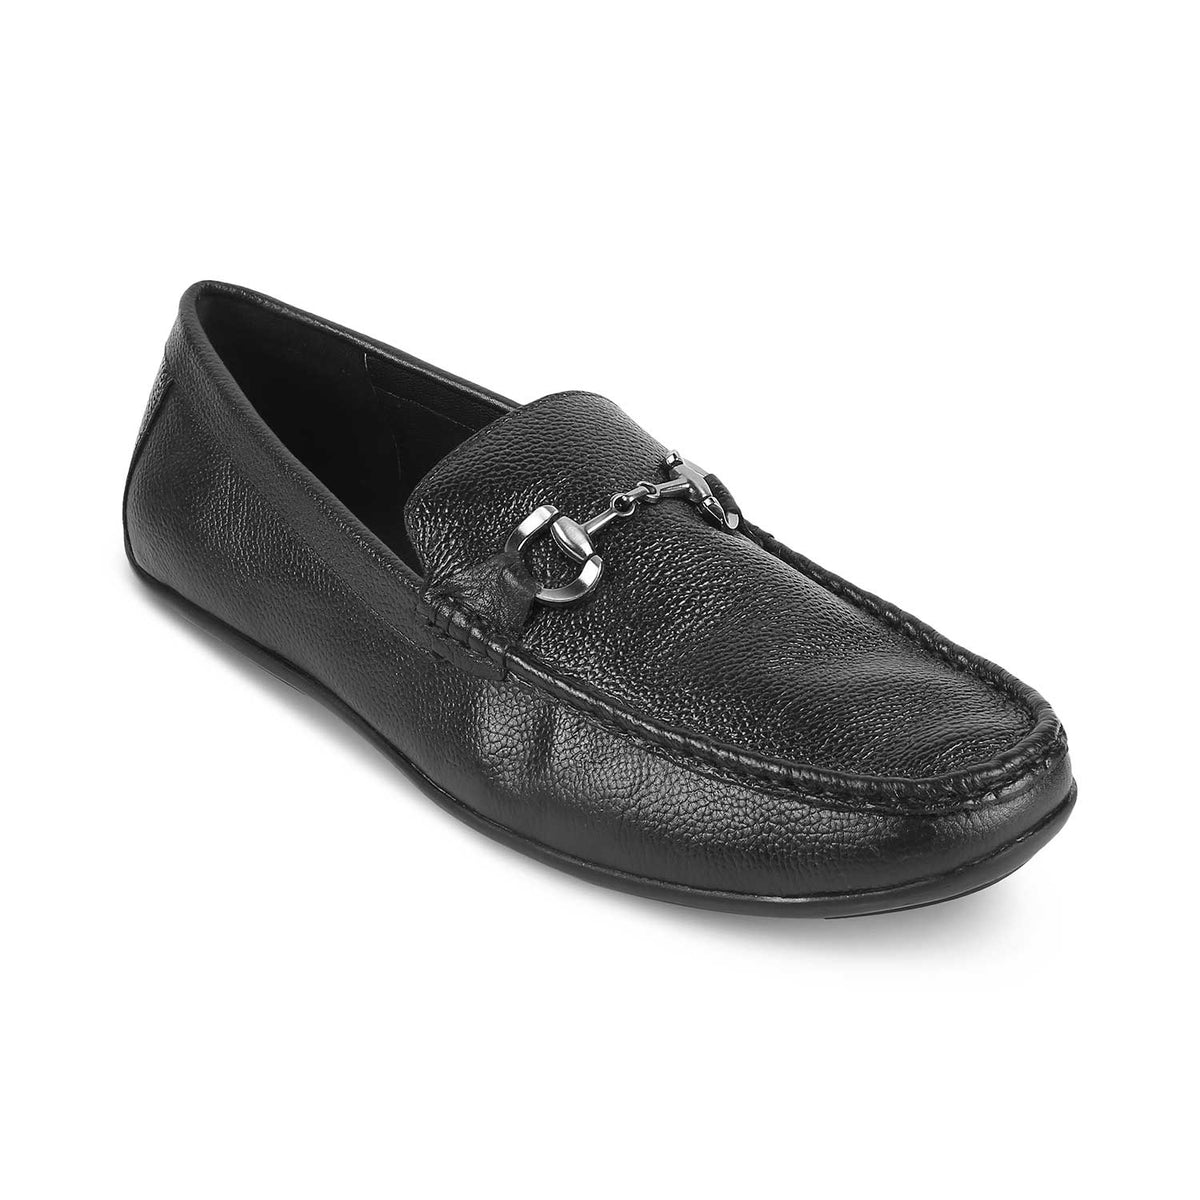 The Rosee Black Men's Leather Driving Loafers Tresmode